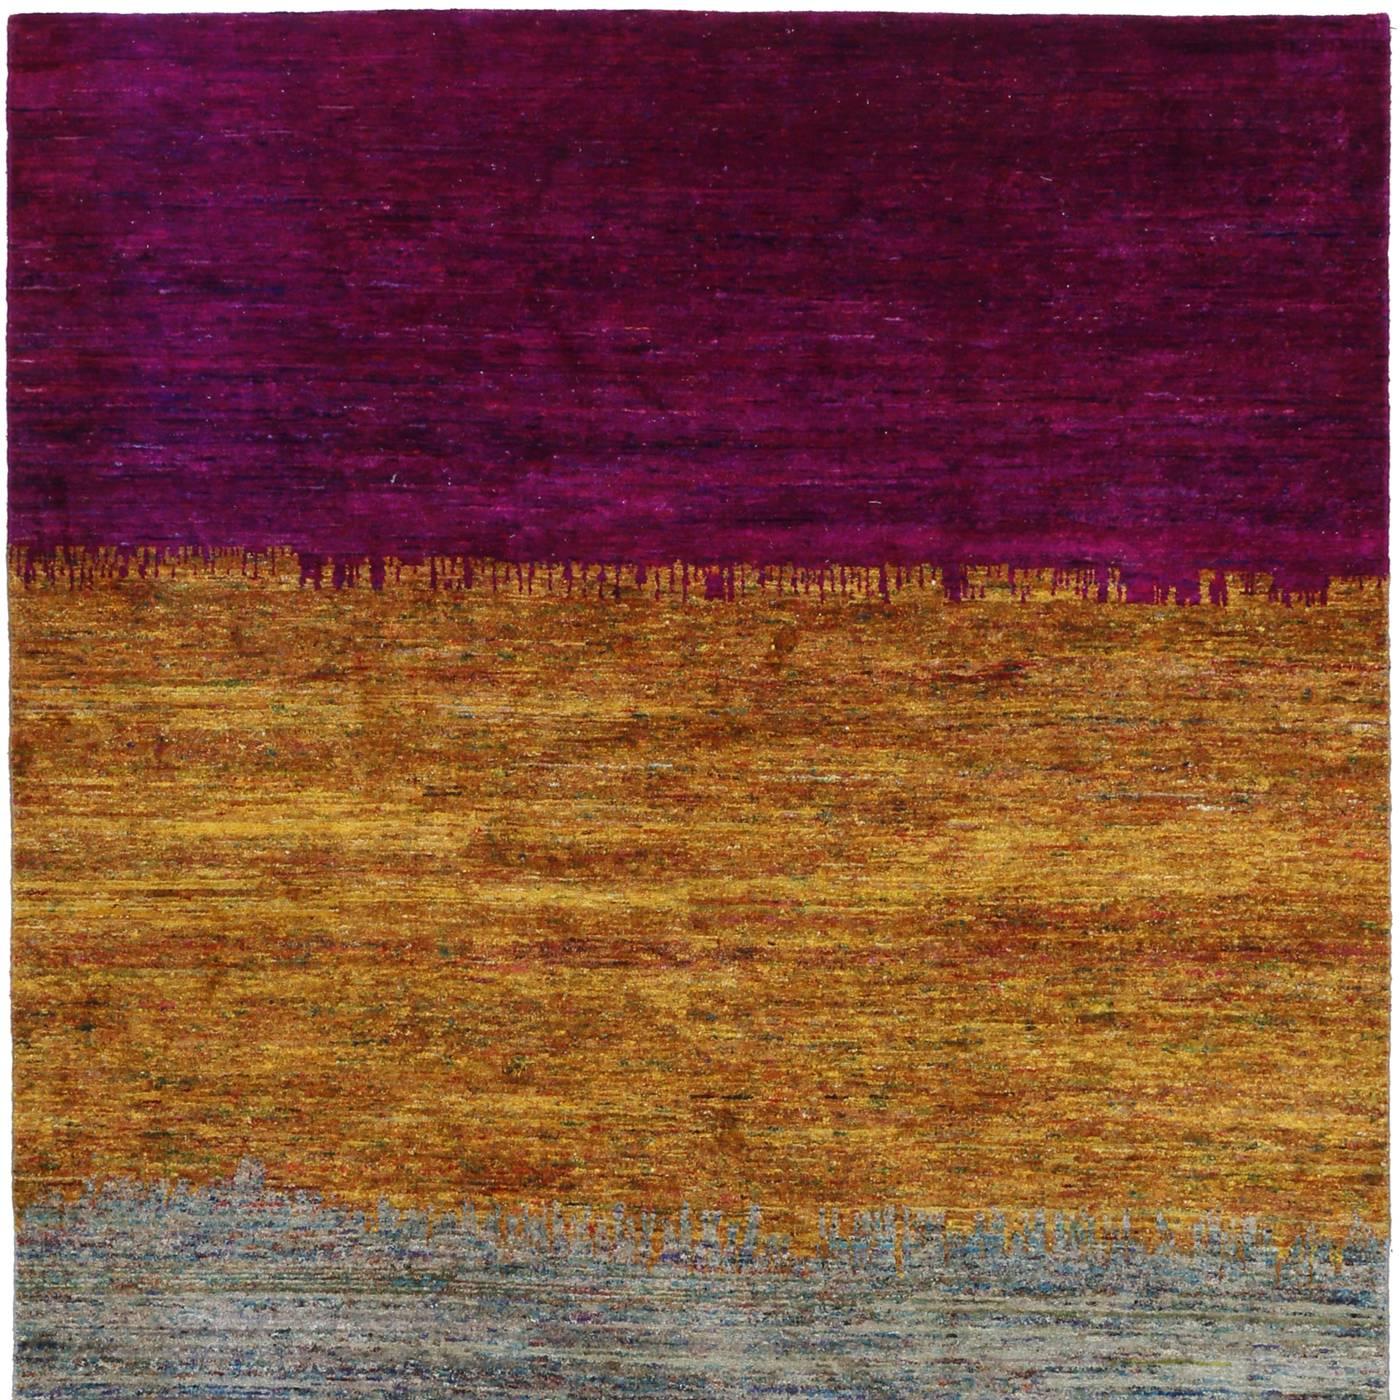 This exquisite carpet was hand-knotted using 100% silk obtained from Sari fabrics. Part of a collection inspired by Ikat antique textiles of Central Asia, this piece was designed by Barbara Frua De Angeli exclusively for Alberto Levi Gallery and